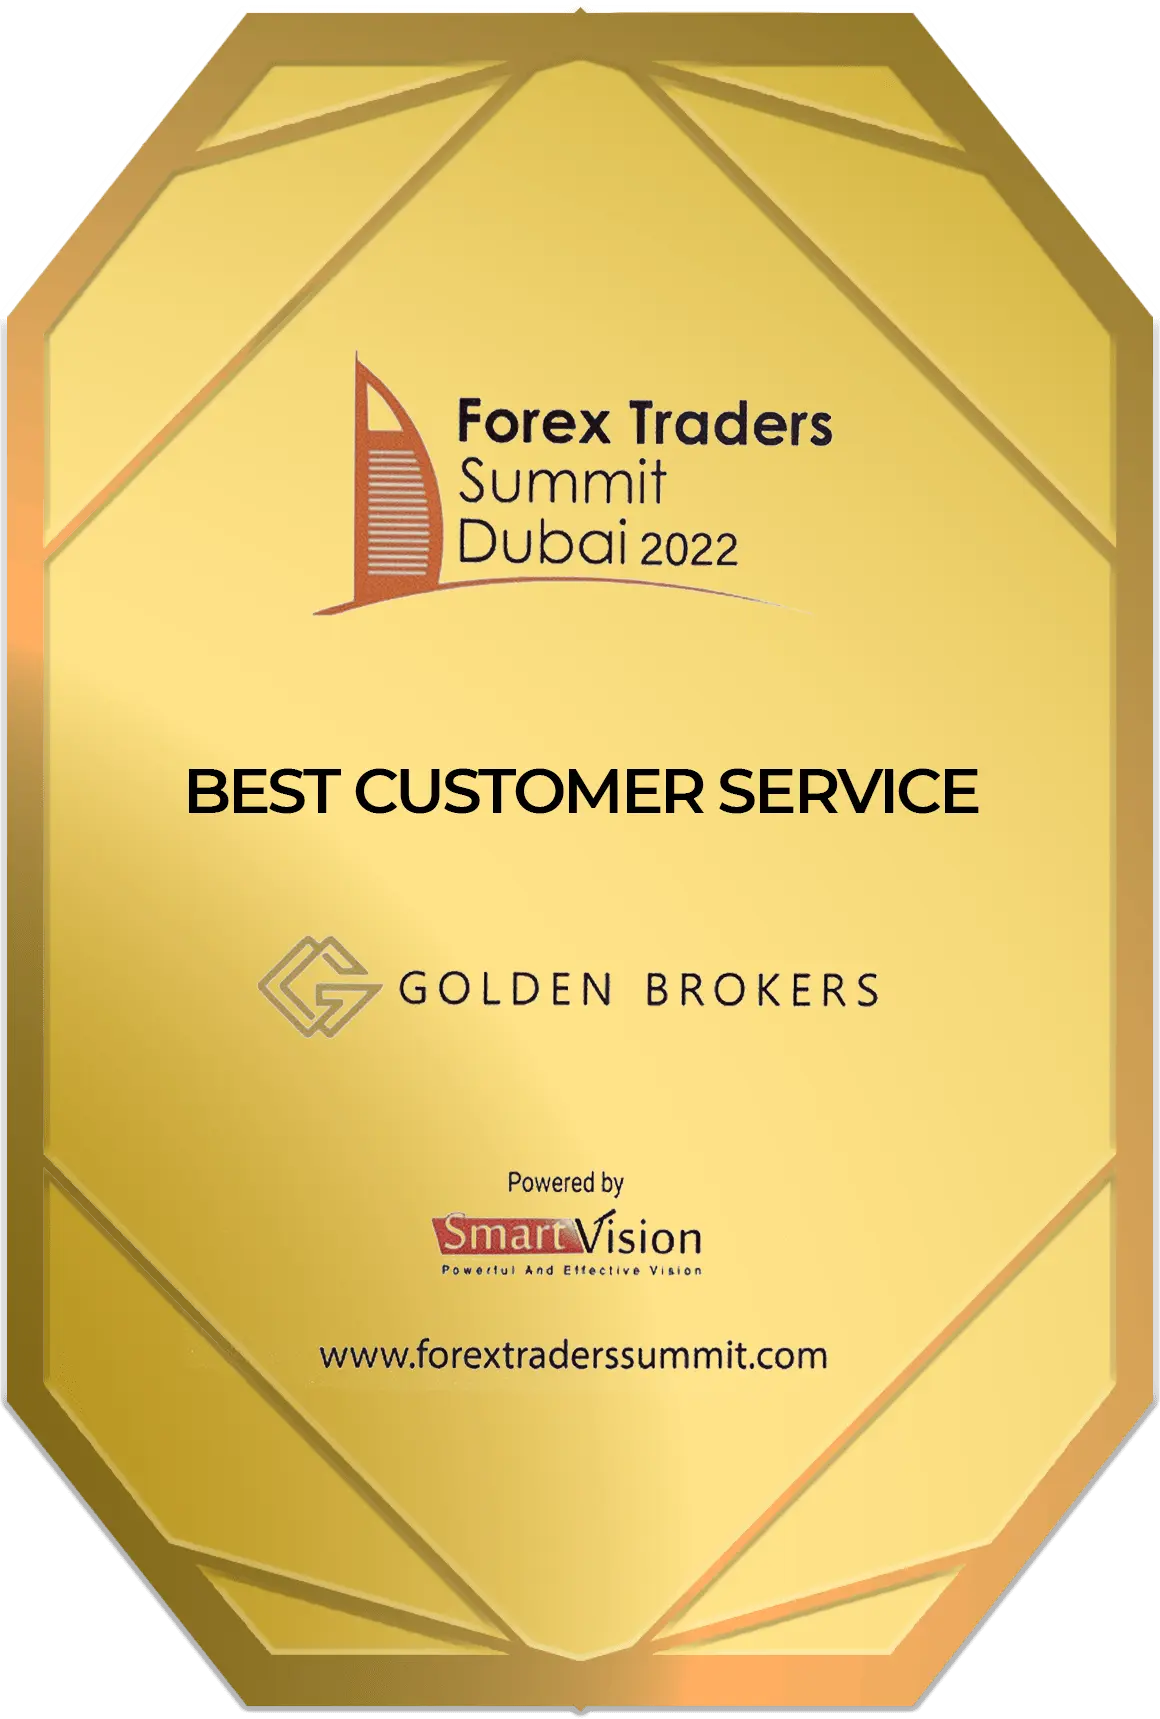 Golden Brokers Awarded Best Customer Service and Fast Growing